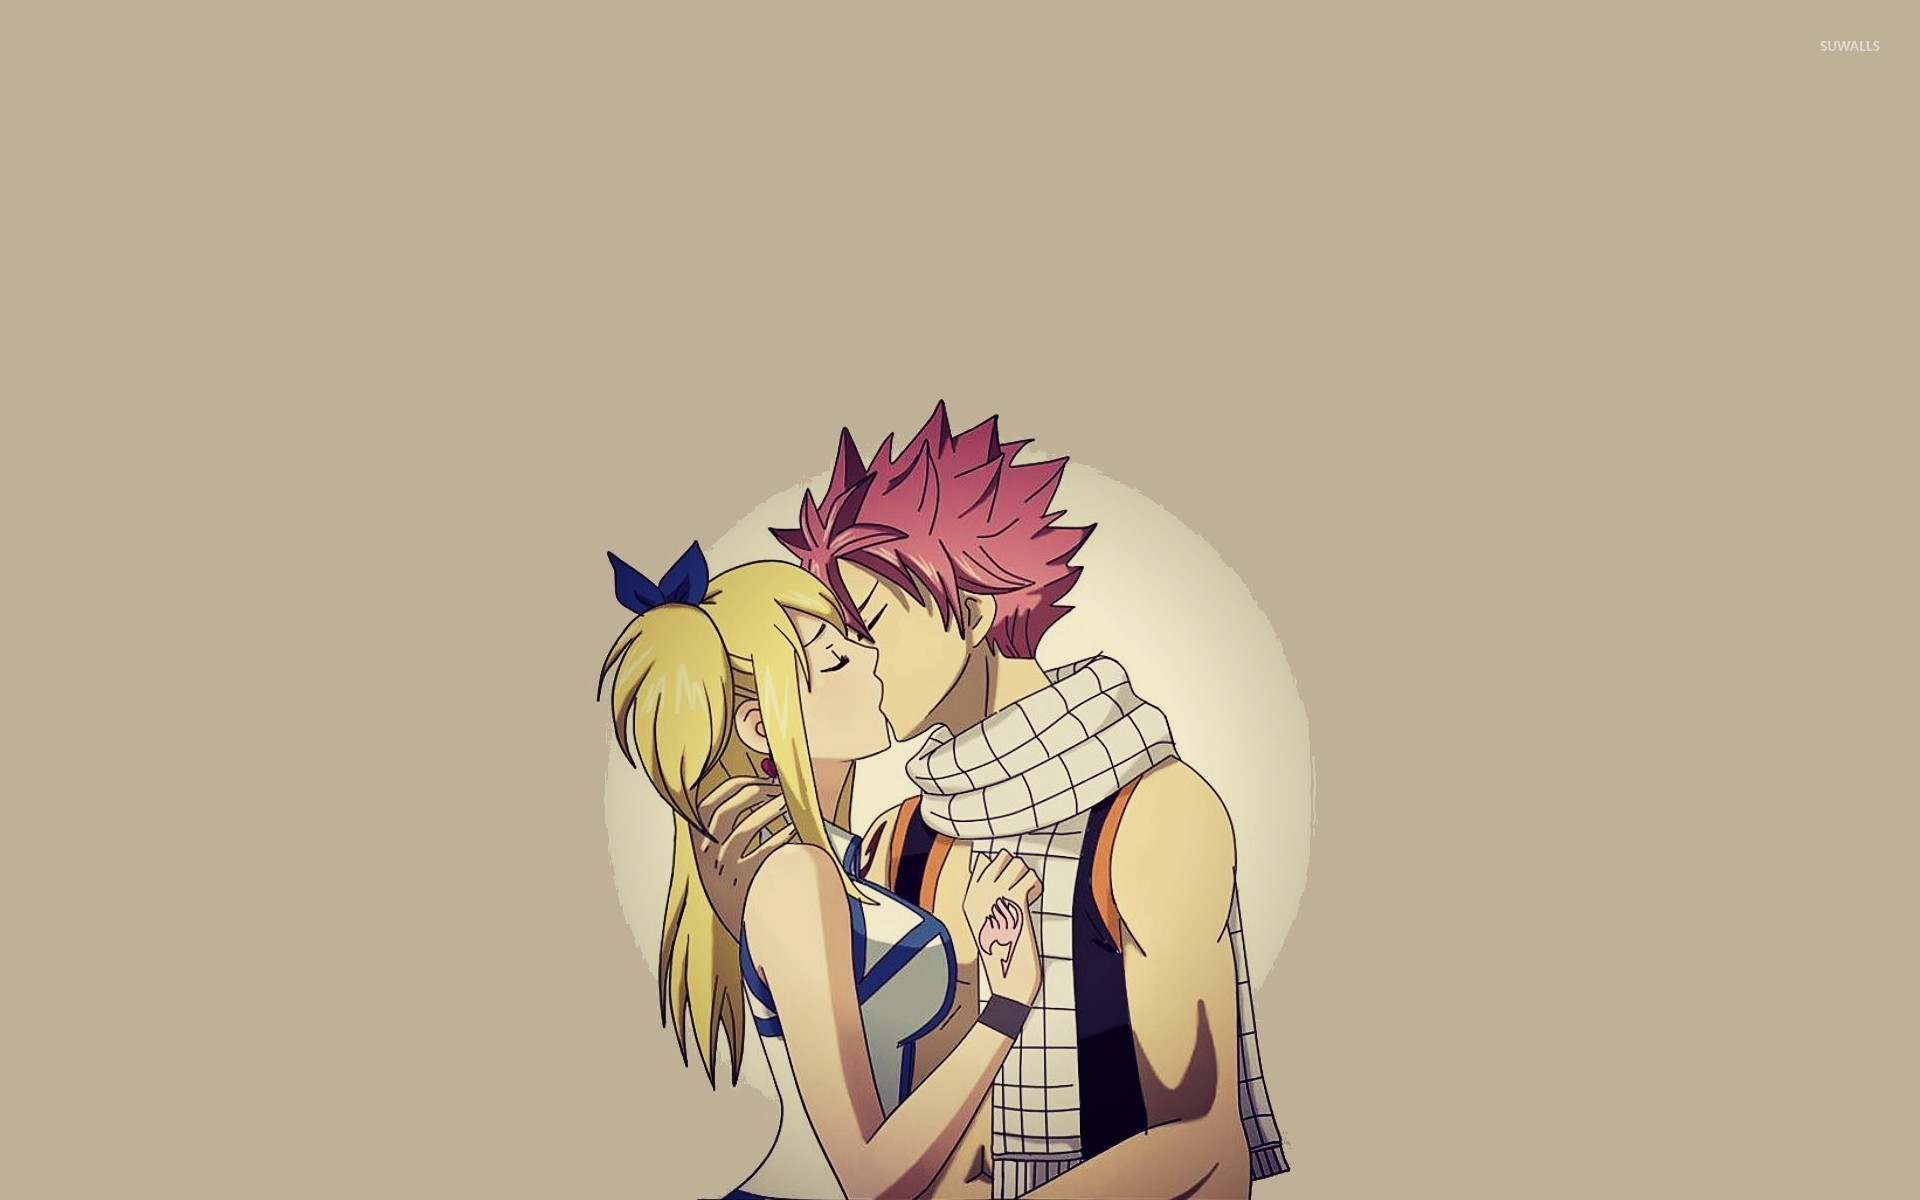 1920x1200 Lucy and Natsu - Fairy Tail wallpaper